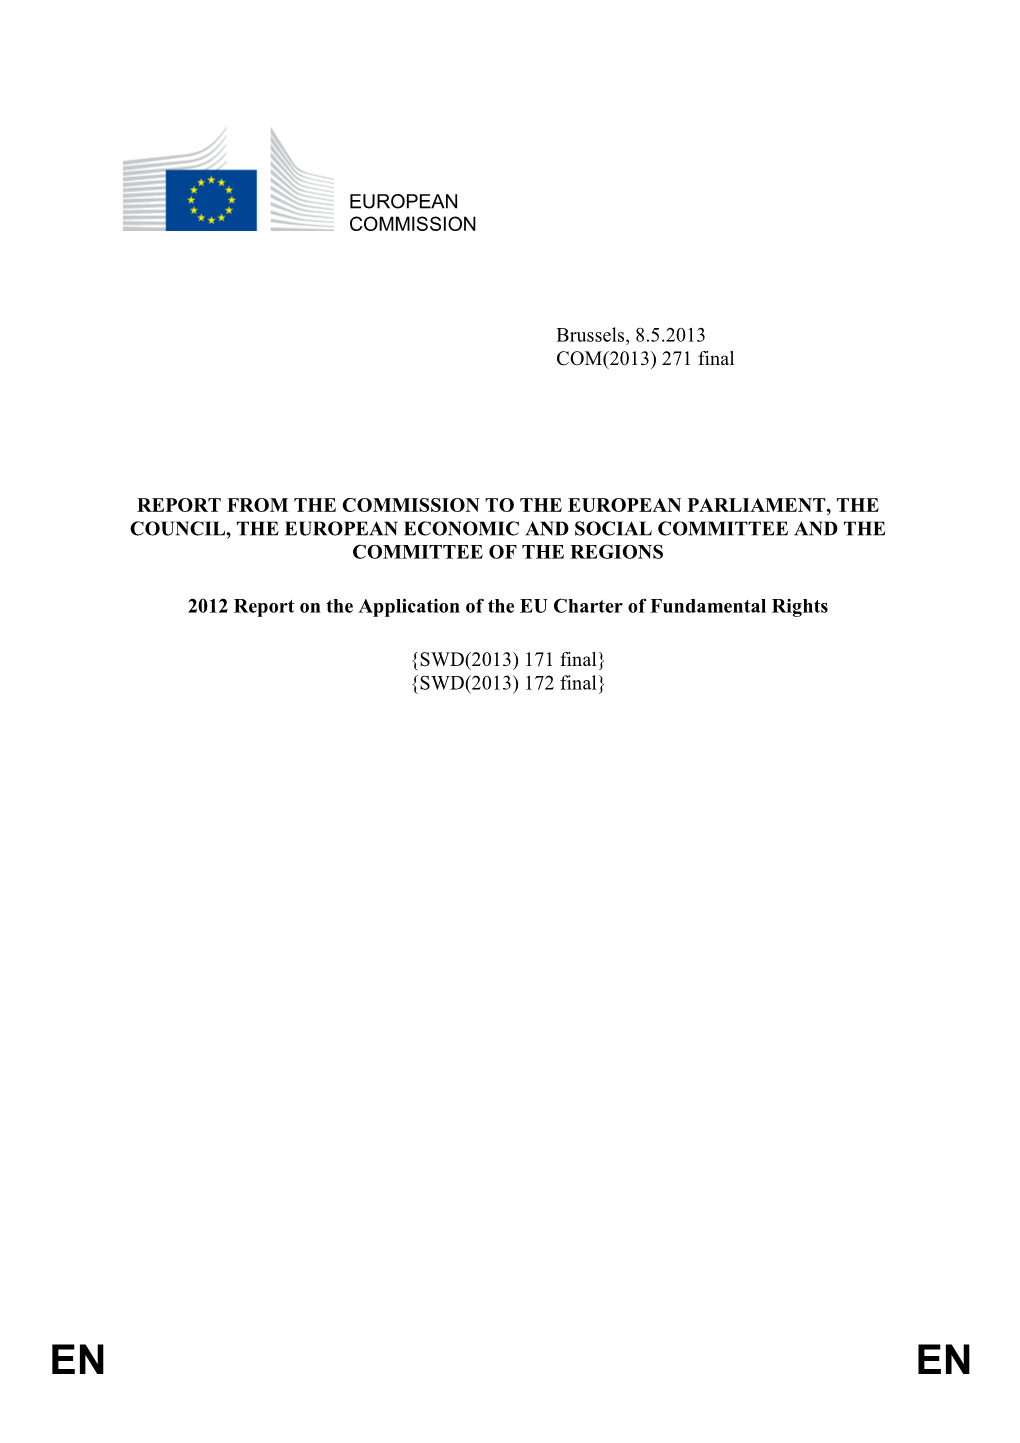 2012 Report on the Application of the EU Charter of Fundamental Rights